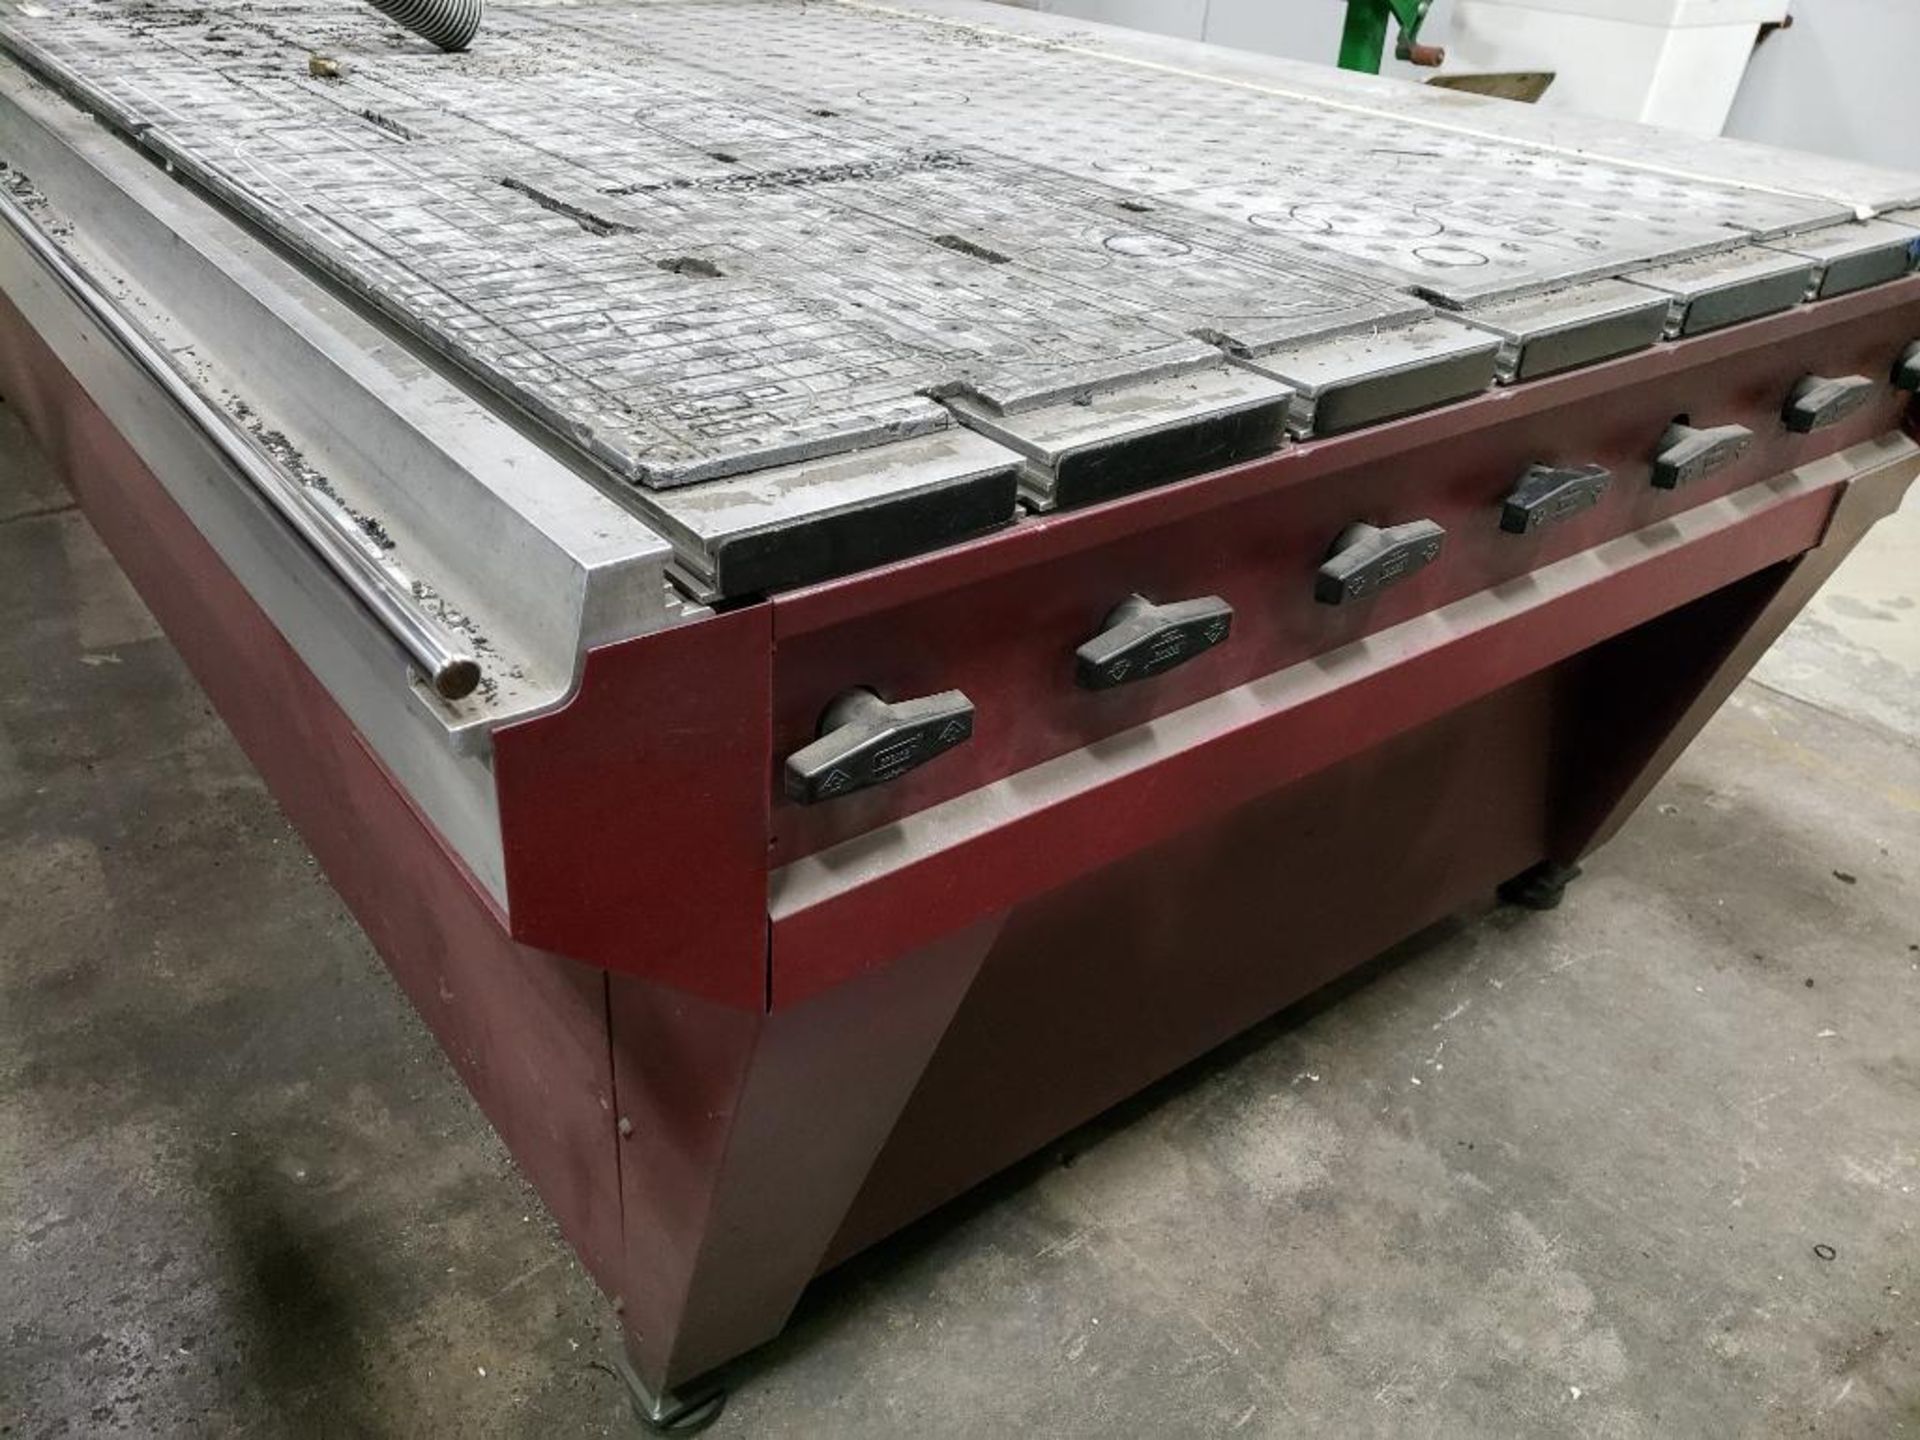 (Parts/Repairable) Gerber Sabre Model 408 CNC router. 54in x 121in table. 208-240v single phase. - Image 18 of 27